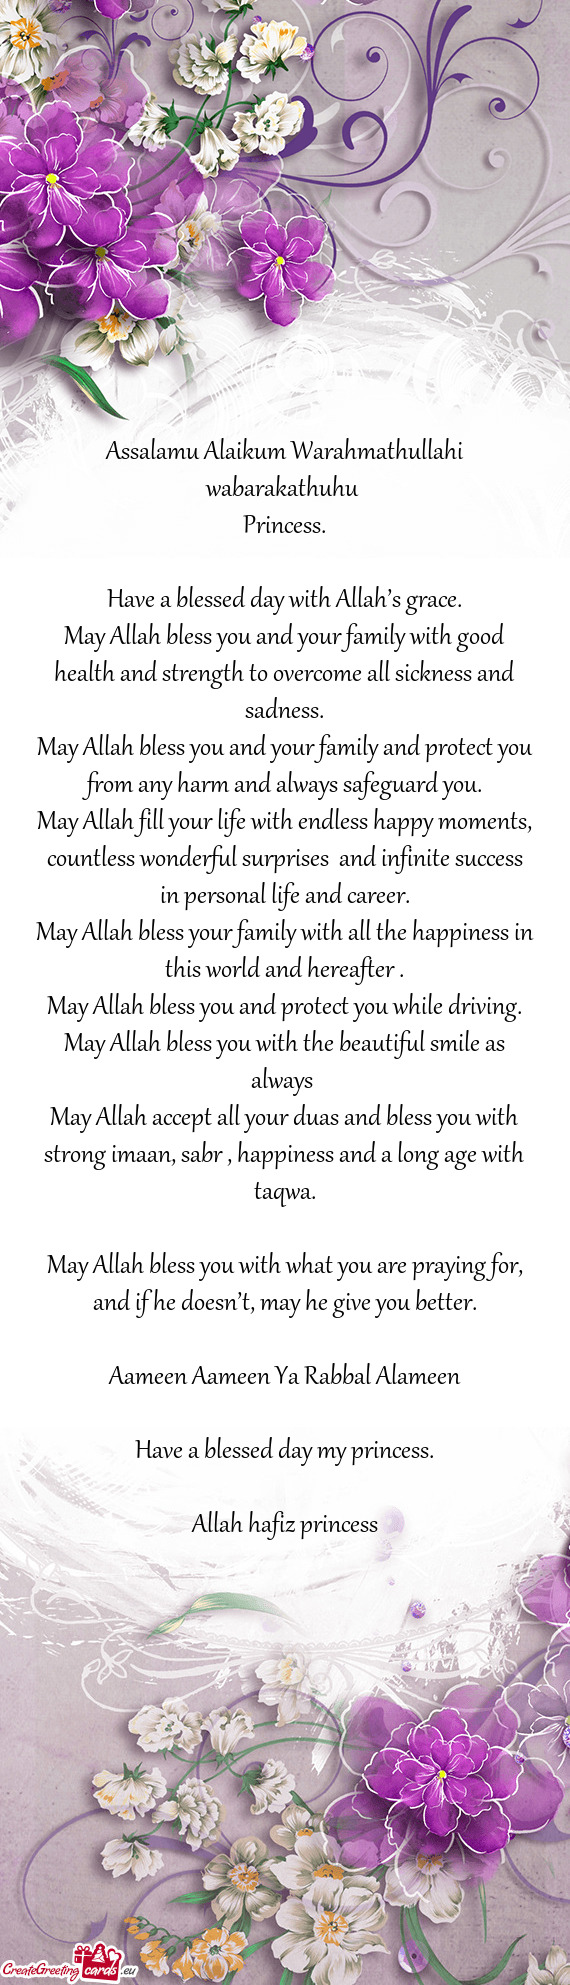 May Allah bless you and your family and protect you from any harm and always safeguard you